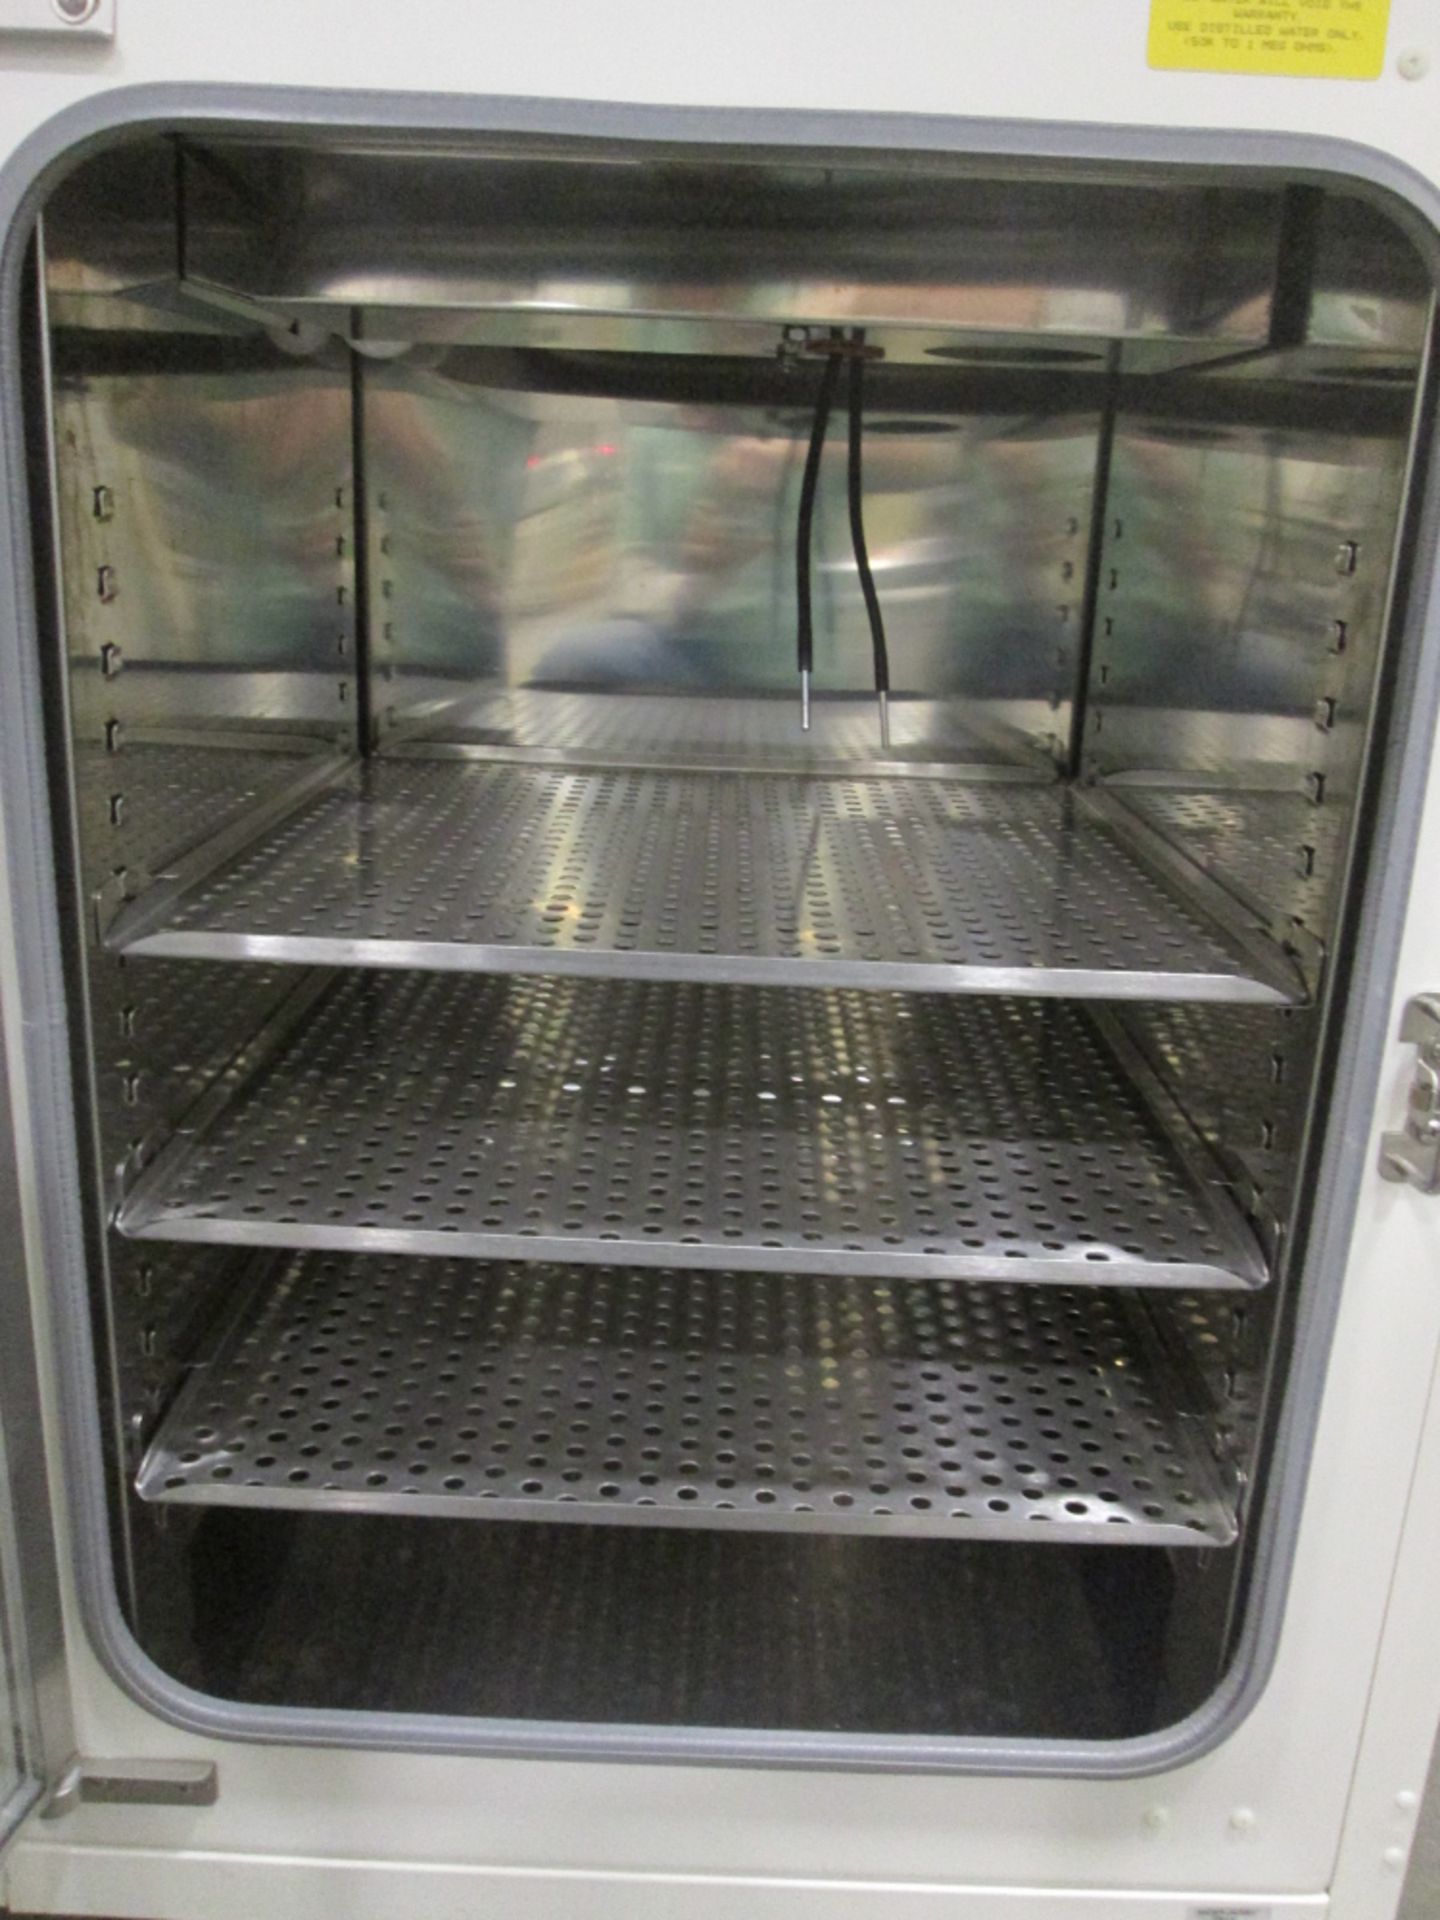 Thermo Forma 3110 CO2 Water Jacketed Incubator - Image 2 of 3